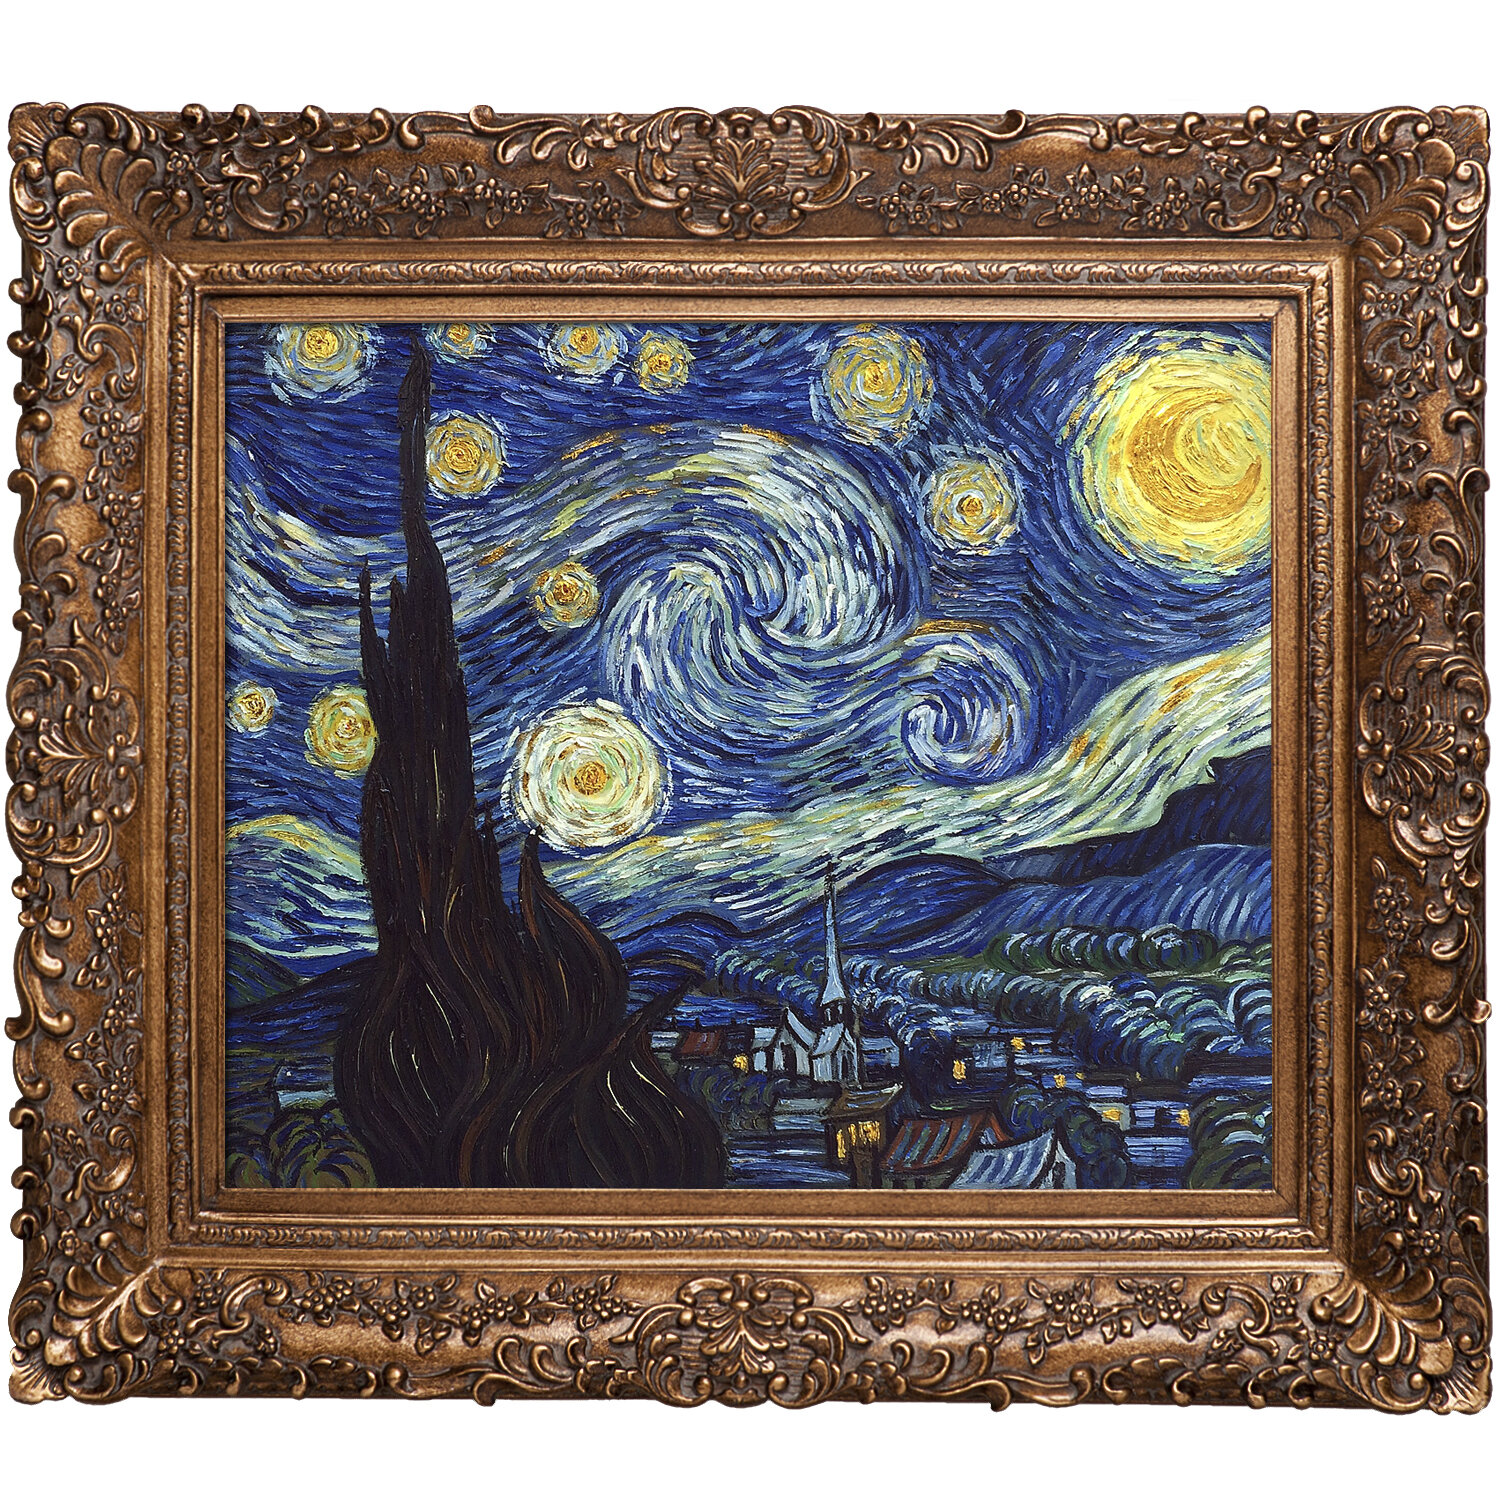  wall26 - Starry Night by Vincent Van Gogh - Framed